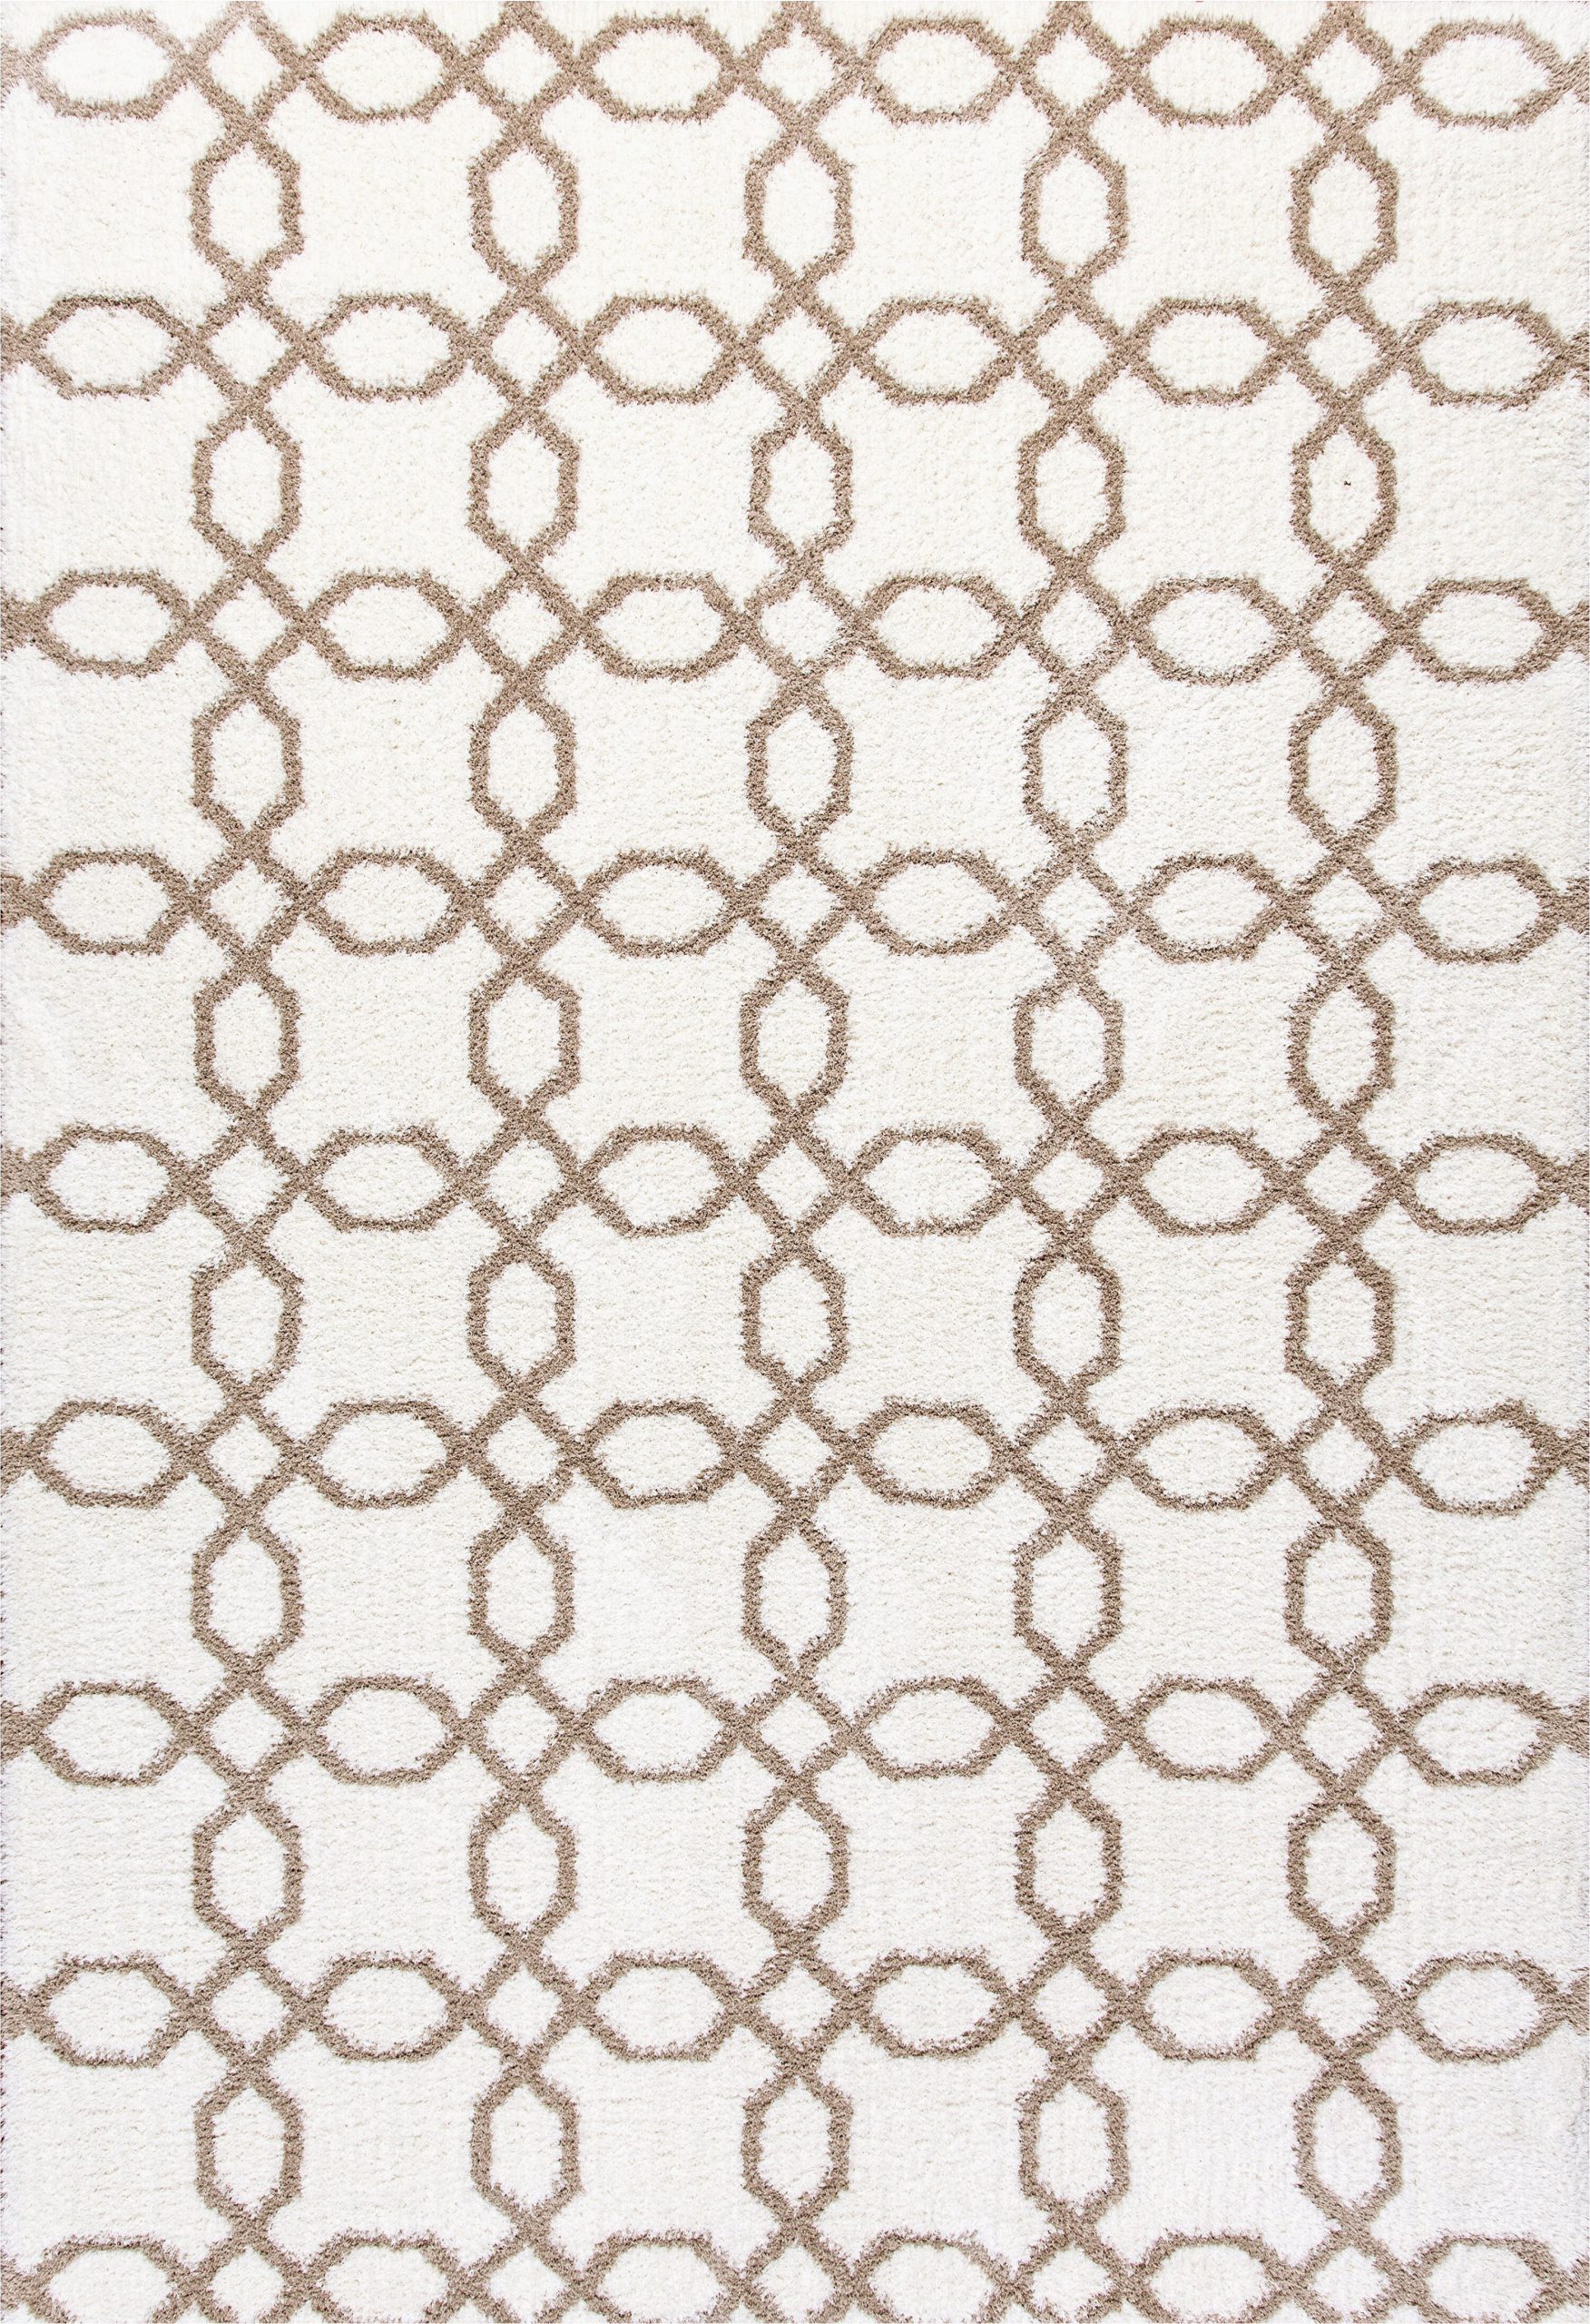 10 X 10 area Rugs at Lowes Lowes White Beige area Rug